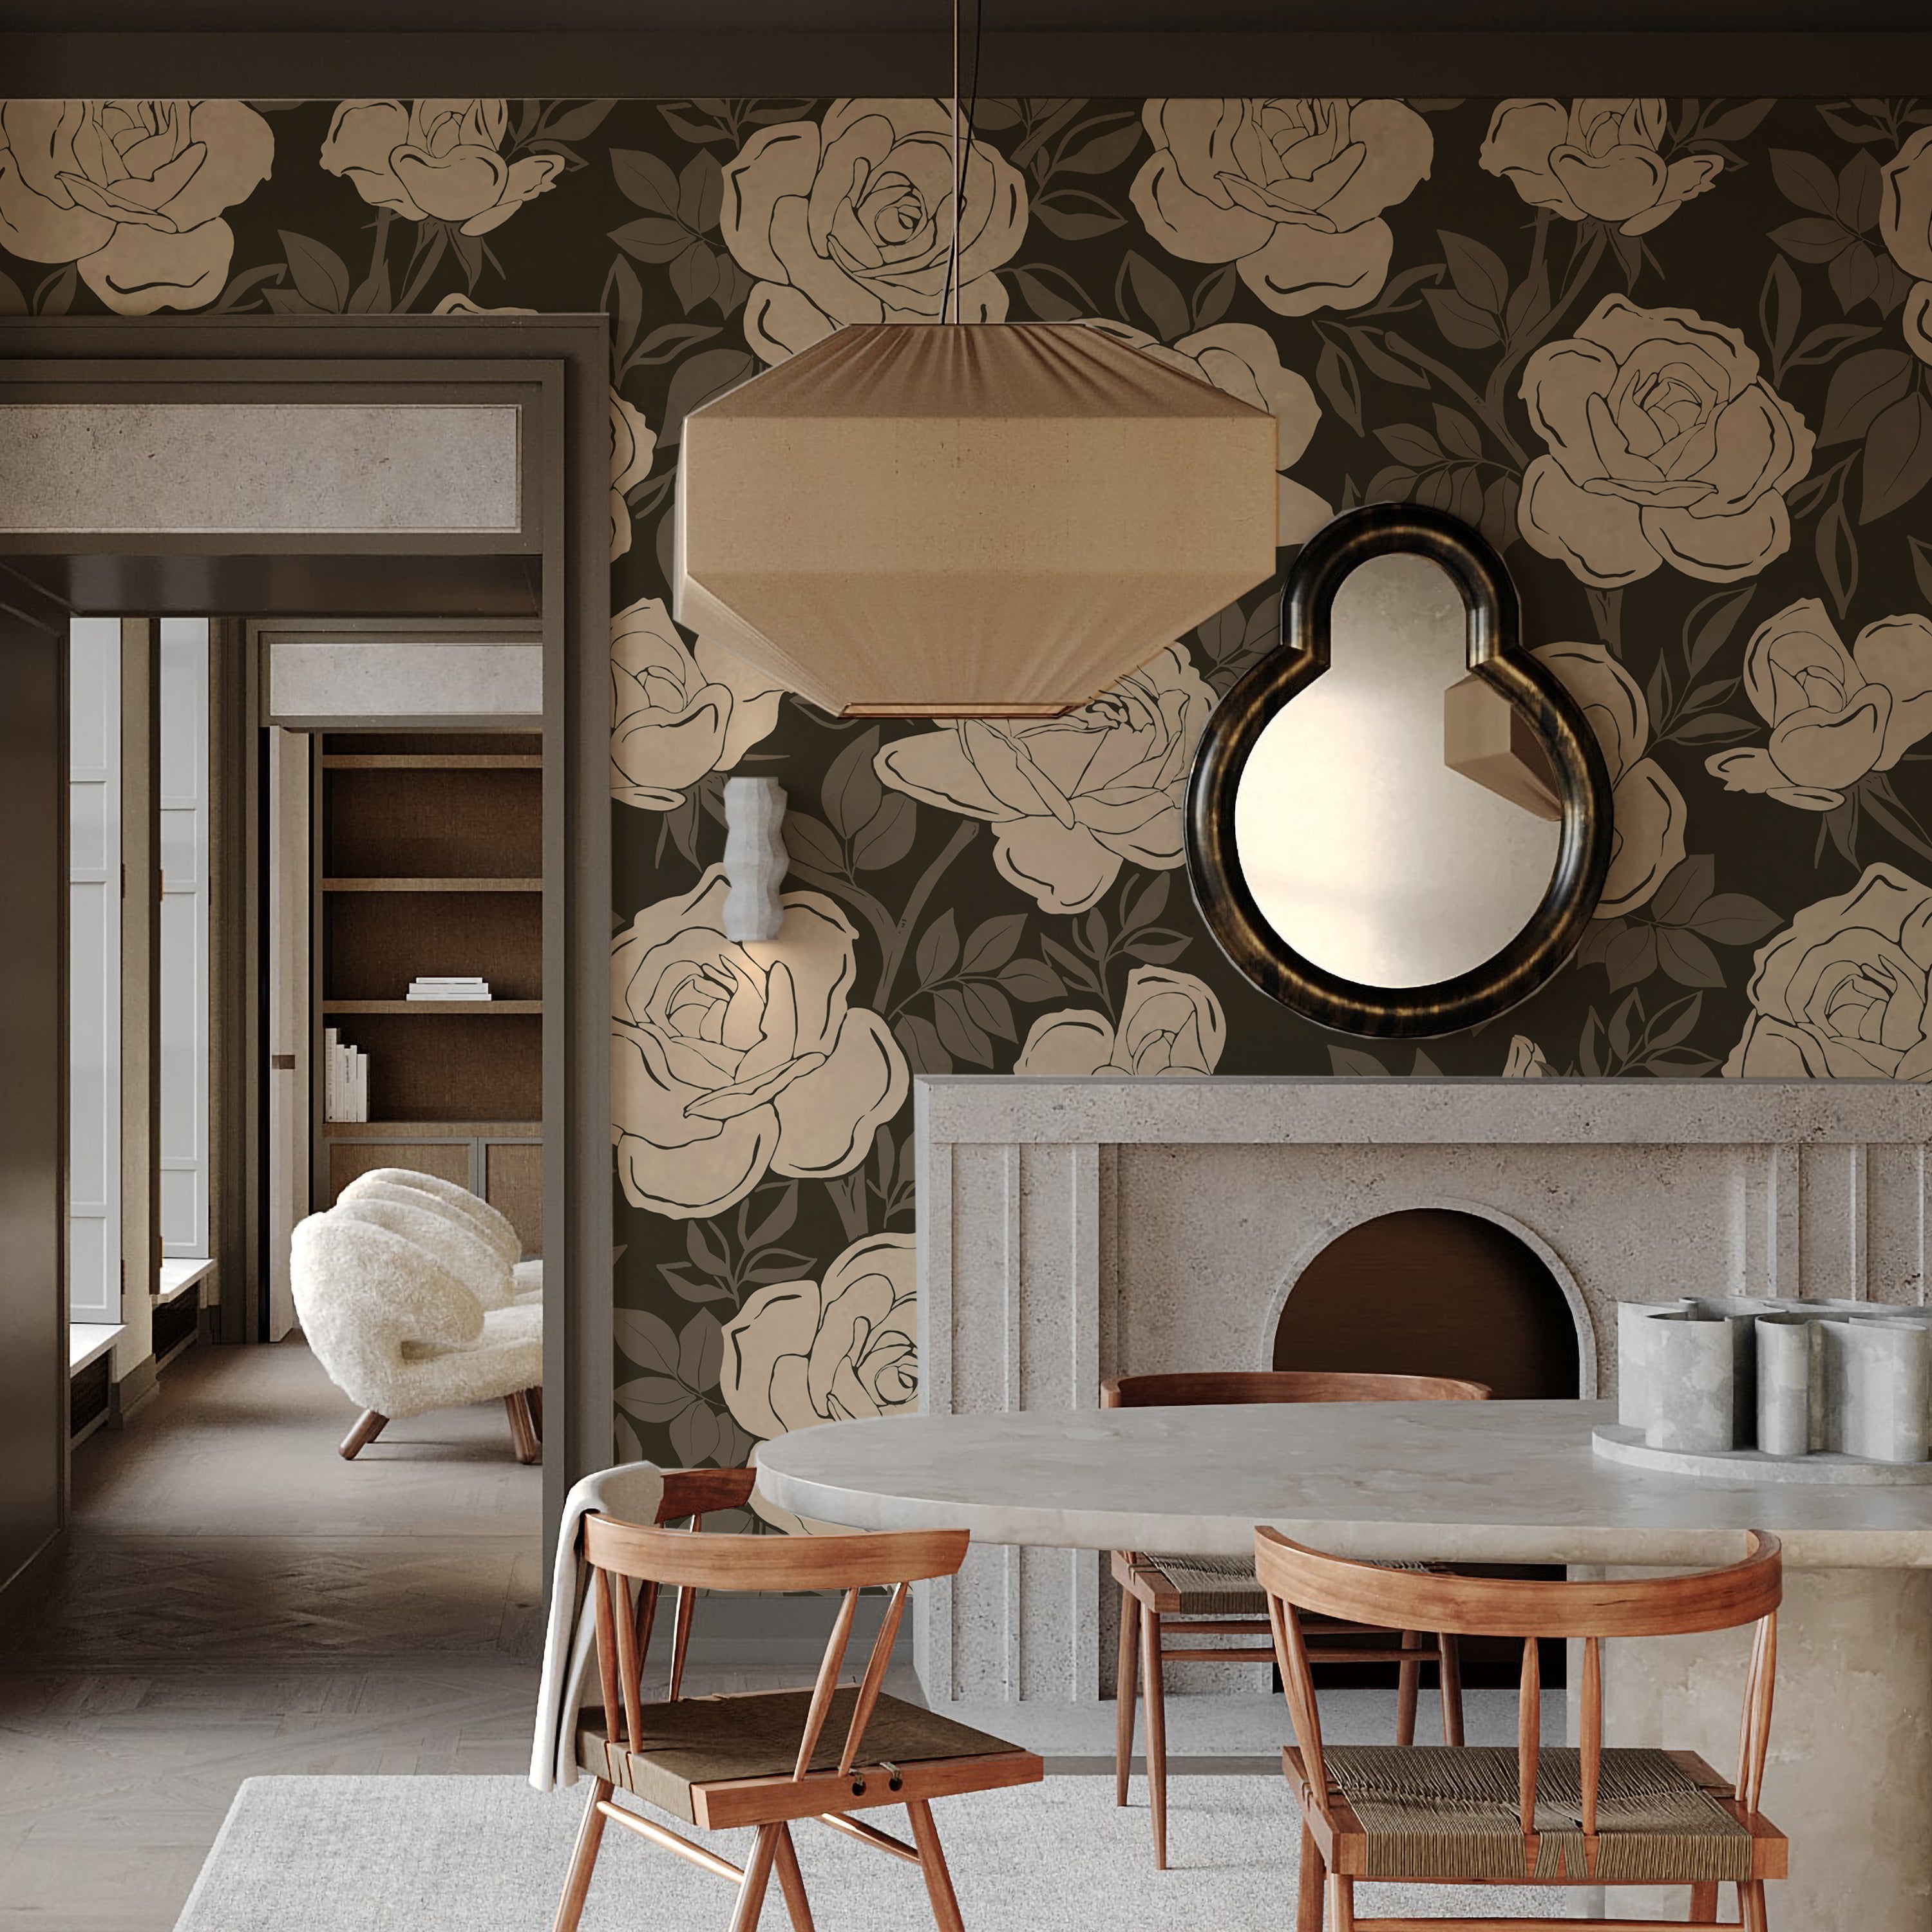 Contemporary dining room enhanced by a floral wallpaper with oversized cream roses on a dark backdrop. The room features a concrete dining table, wooden chairs, and a unique geometric pendant light, blending modern and rustic elements.